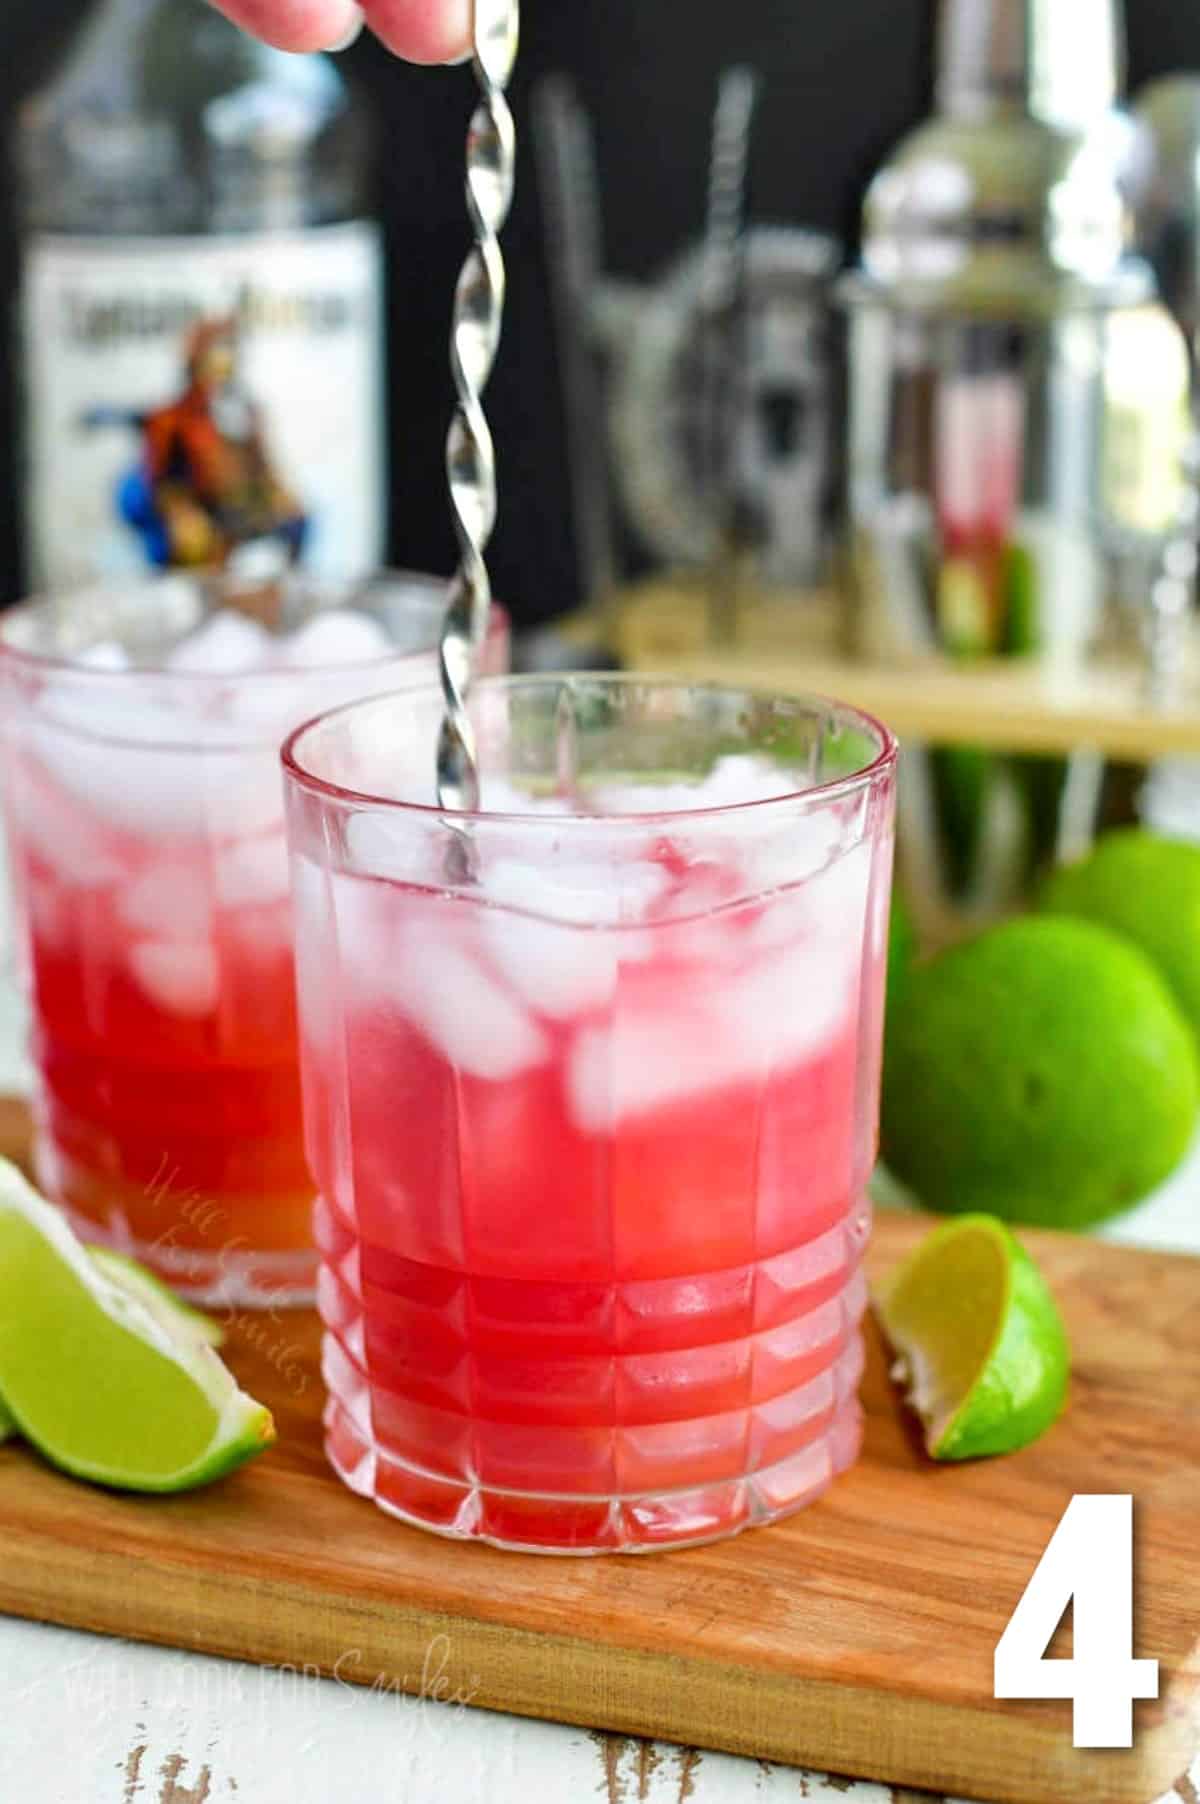 stirring the pink bay breeze cocktail with a bar spoon with limes wedges around.